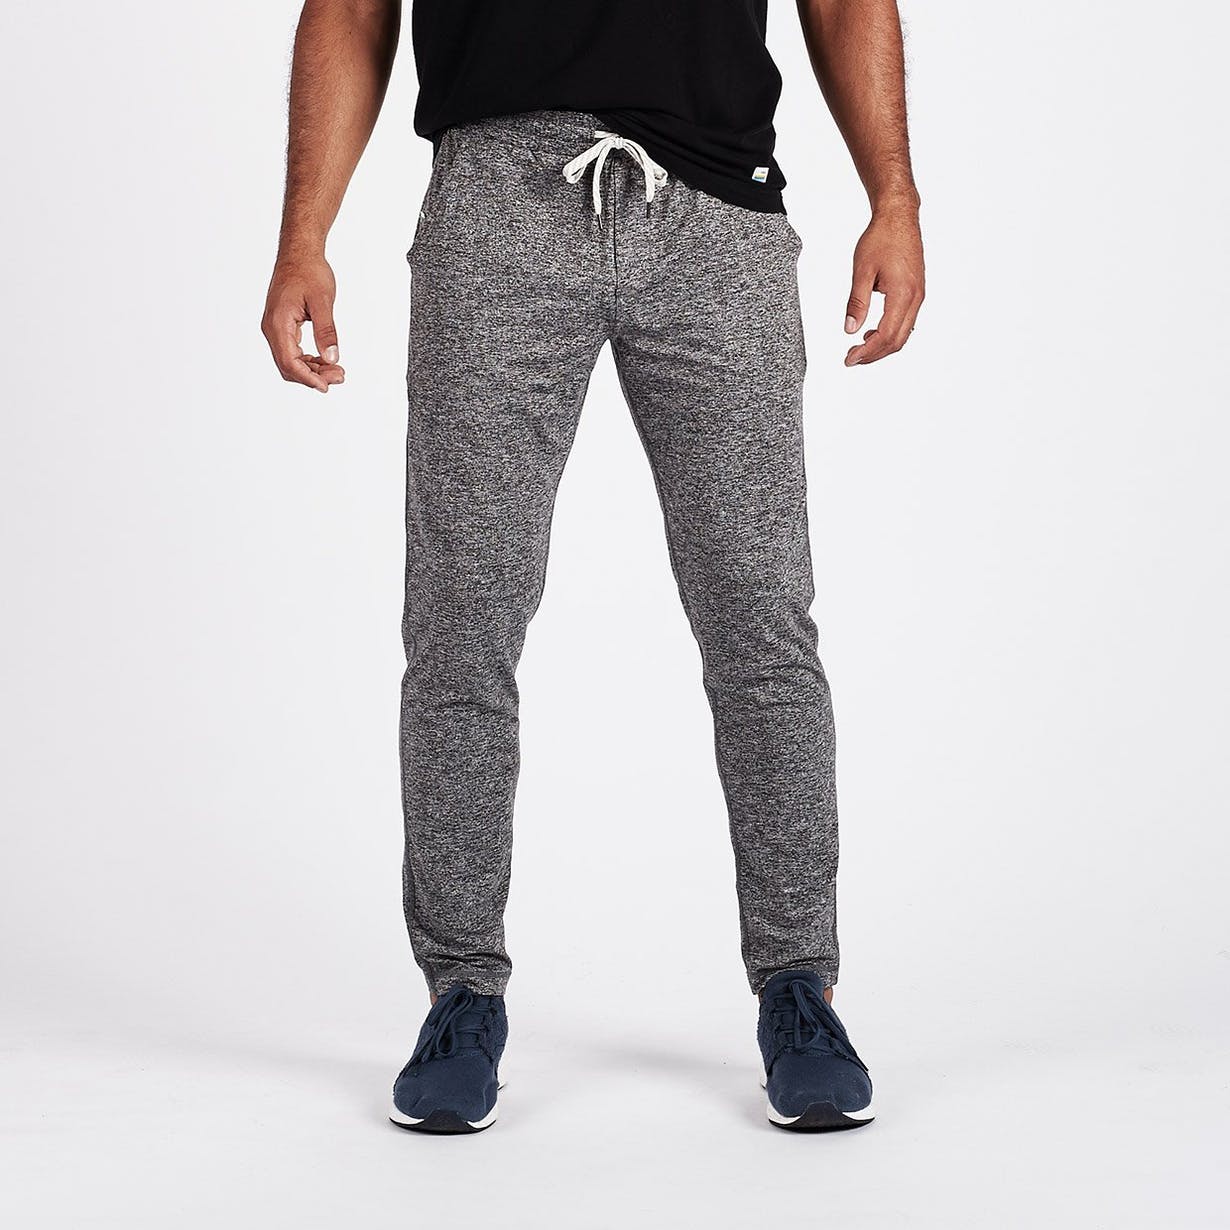 VUORI PONTO PERFORMANCE PANT - AVAILABLE IN 3 COLORS